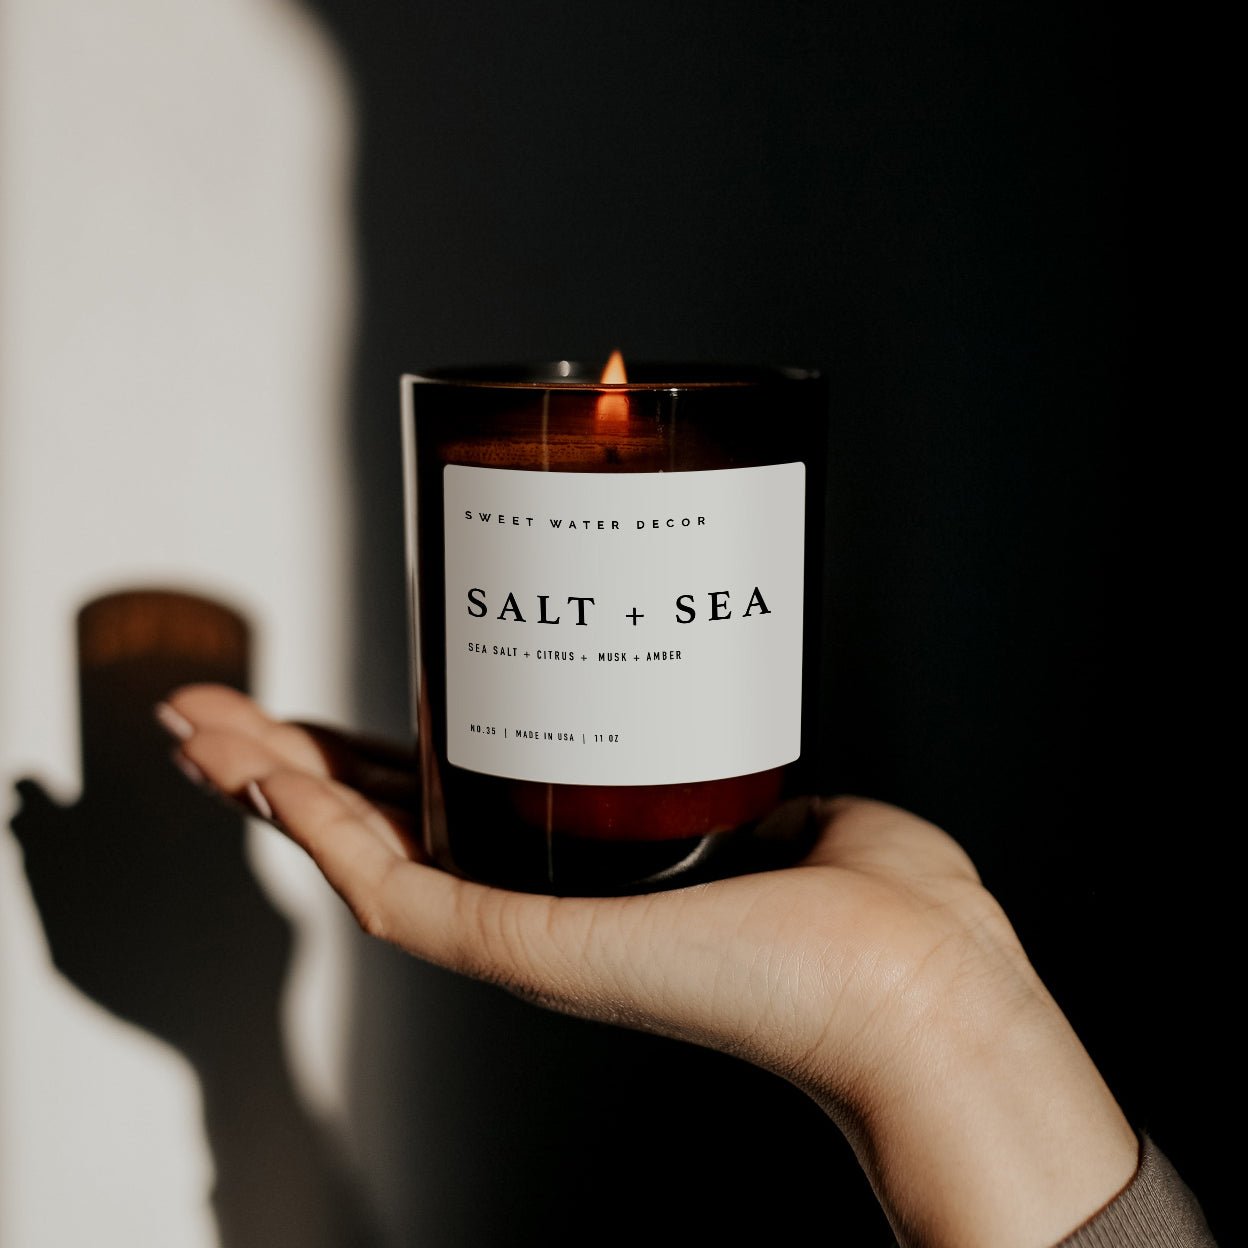 Salt and Sea Soy Candle - Amber Jar - 11 oz - Sweet Water Decor - Candles